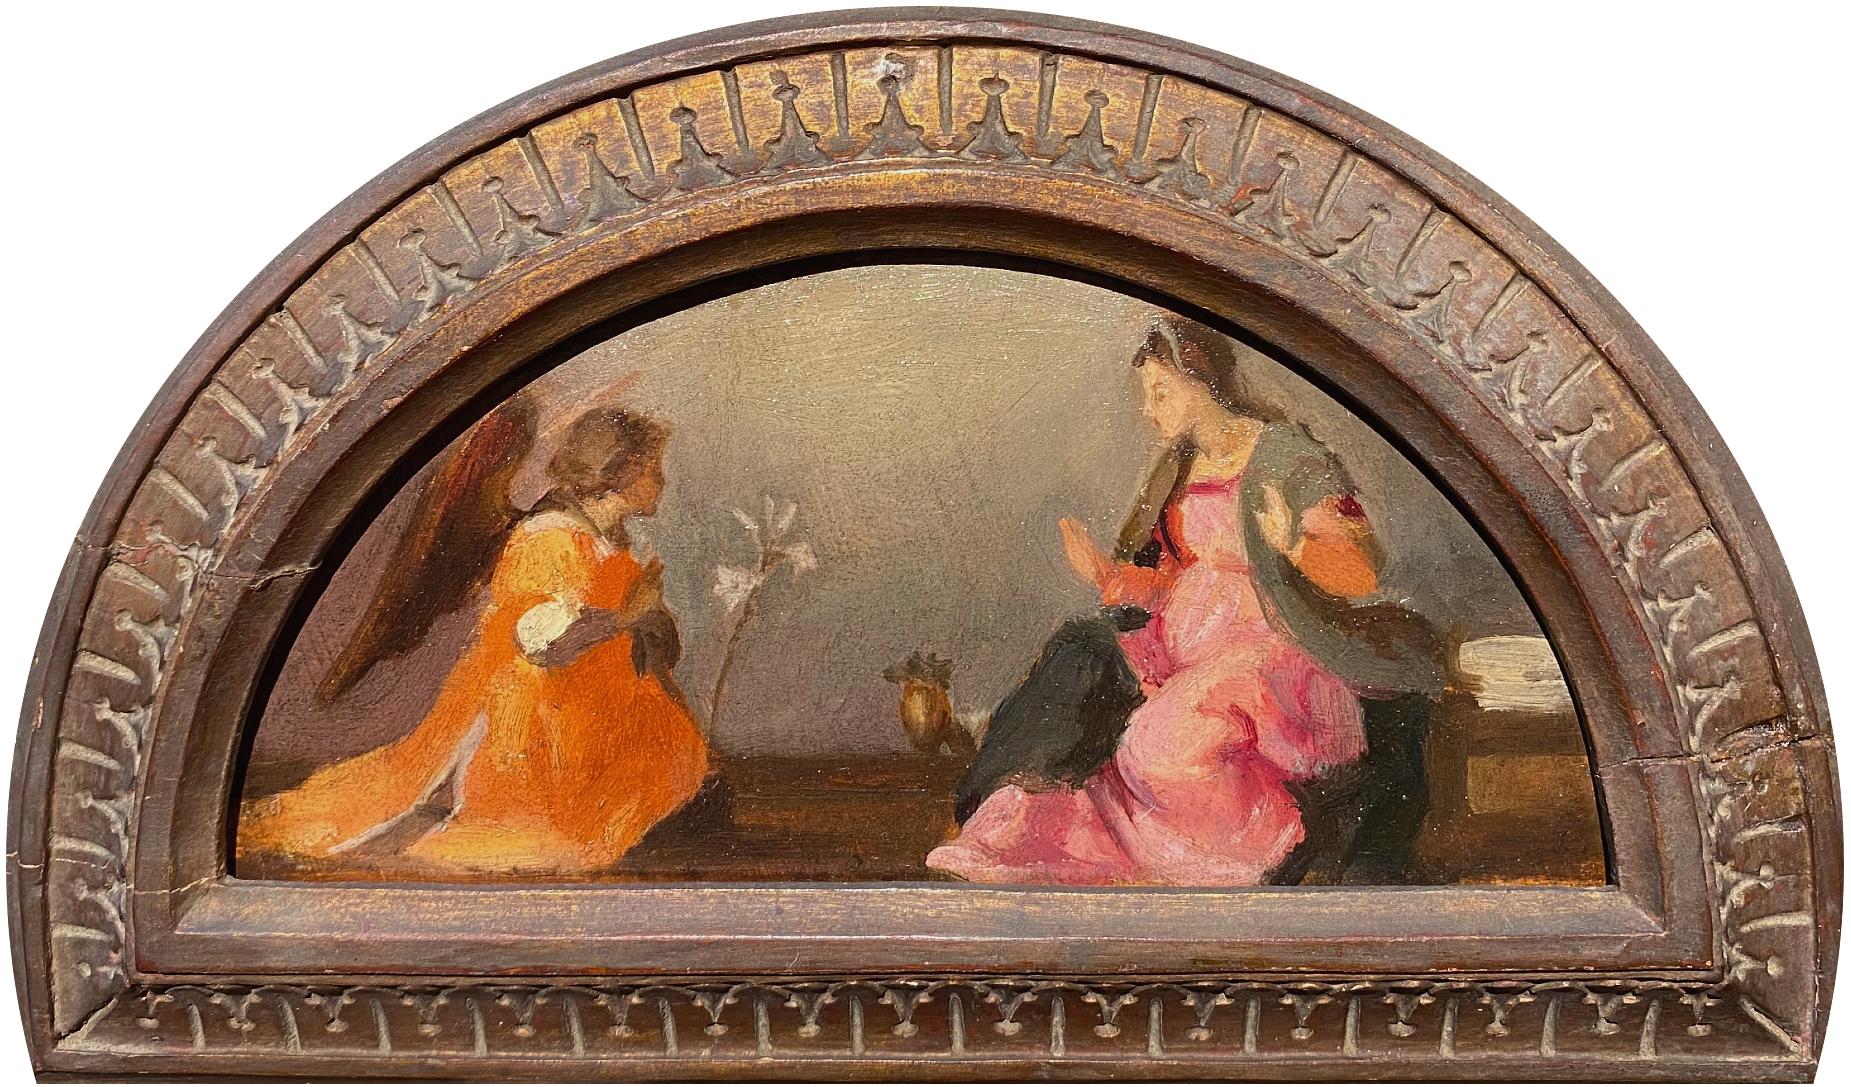 Unknown Figurative Painting - The Annunciation, Gilt Easel Oil Painting, 19th Century European School